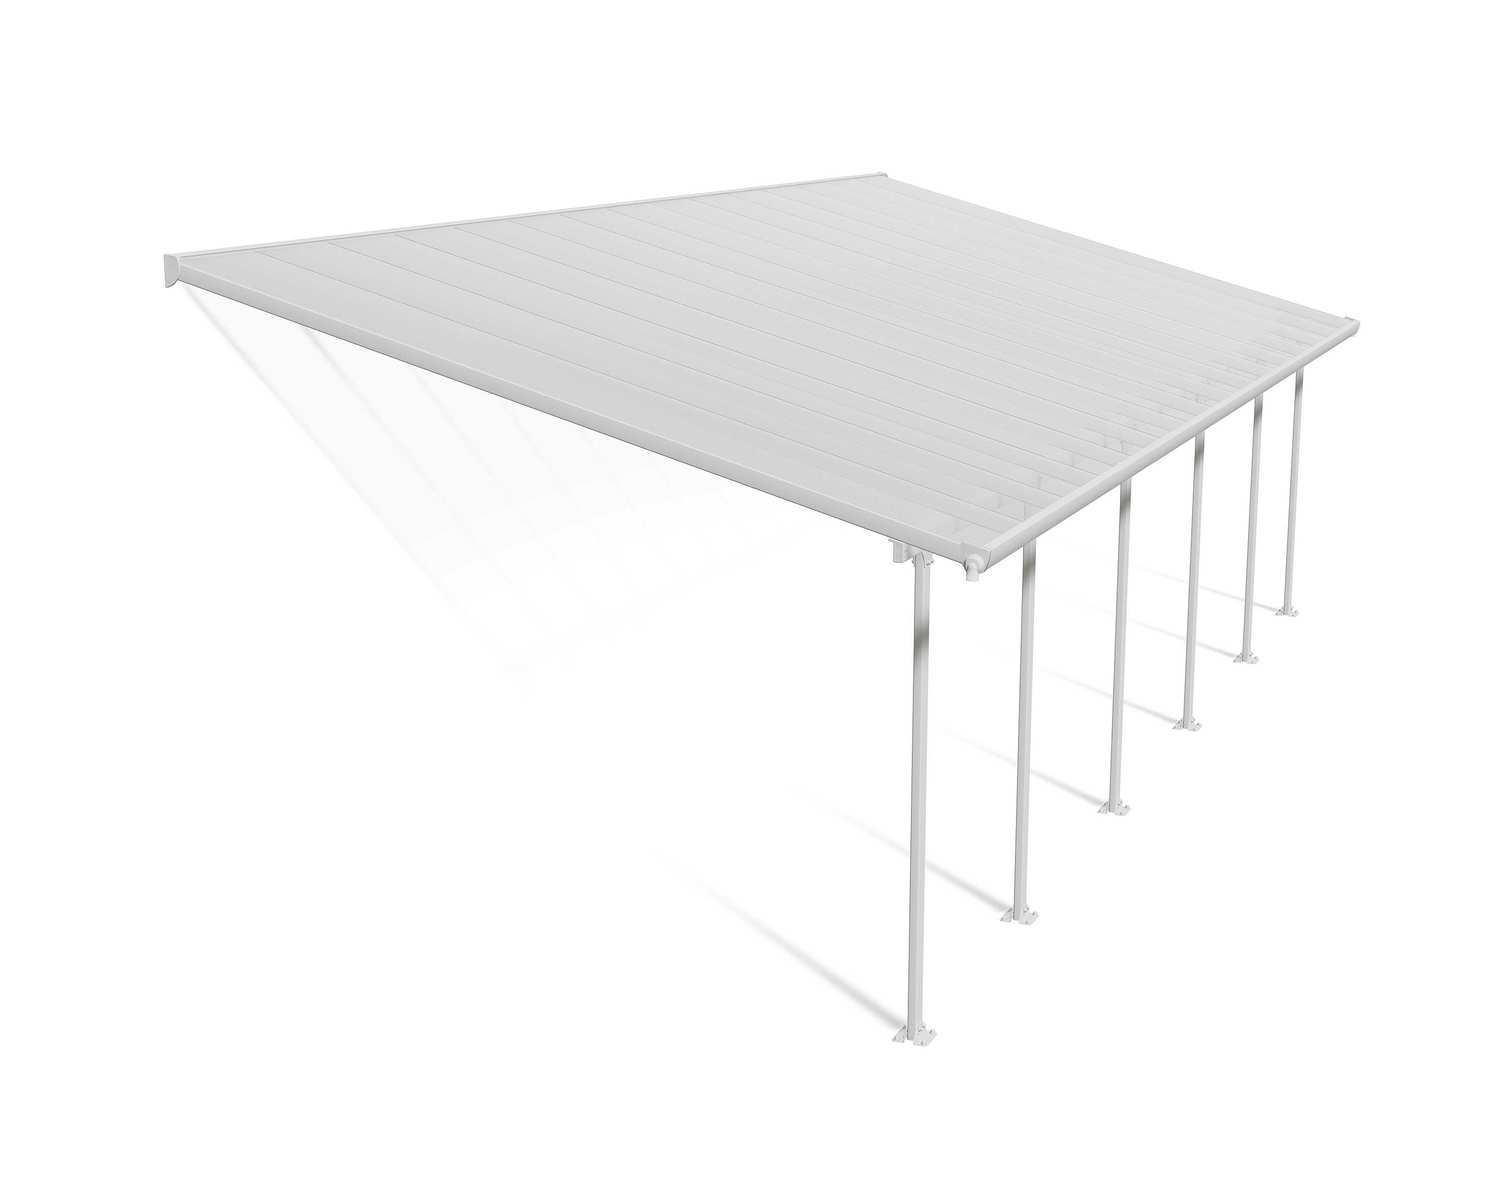 Feria 13 ft. x 34 ft. White Aluminium Patio Cover With 6 Posts, Clear Twin-Wall Polycarbonate Roof Panels.